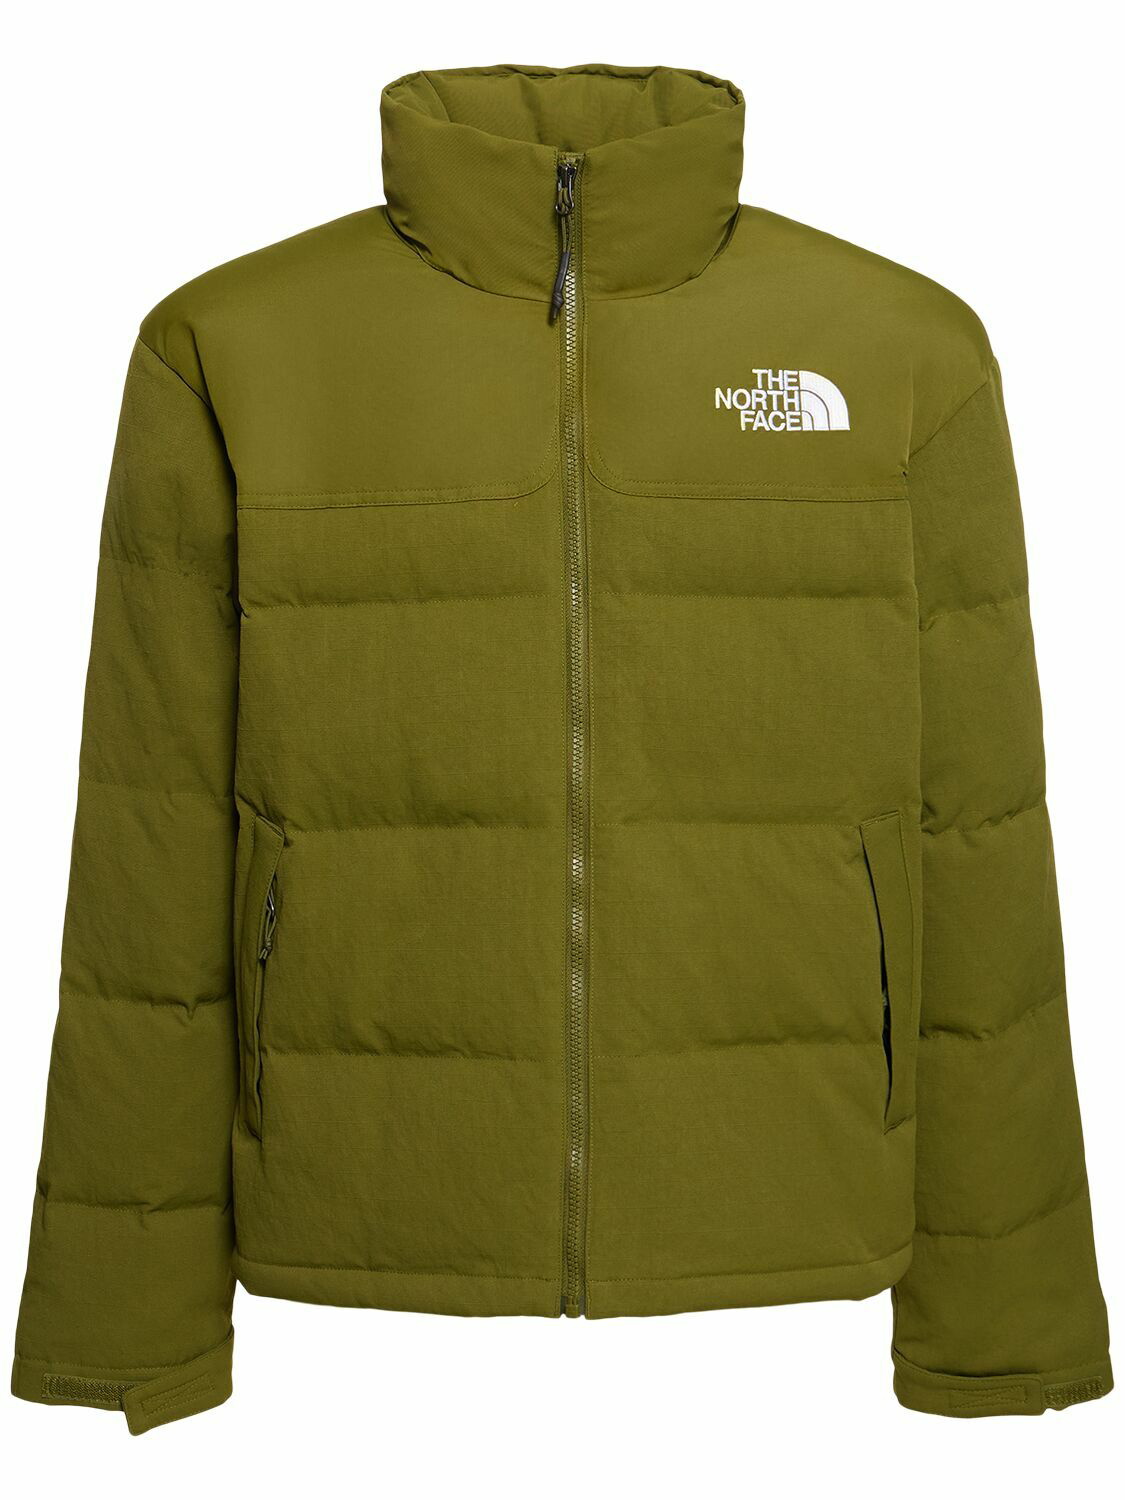 Photo: THE NORTH FACE 92 Crinkle Down Jacket